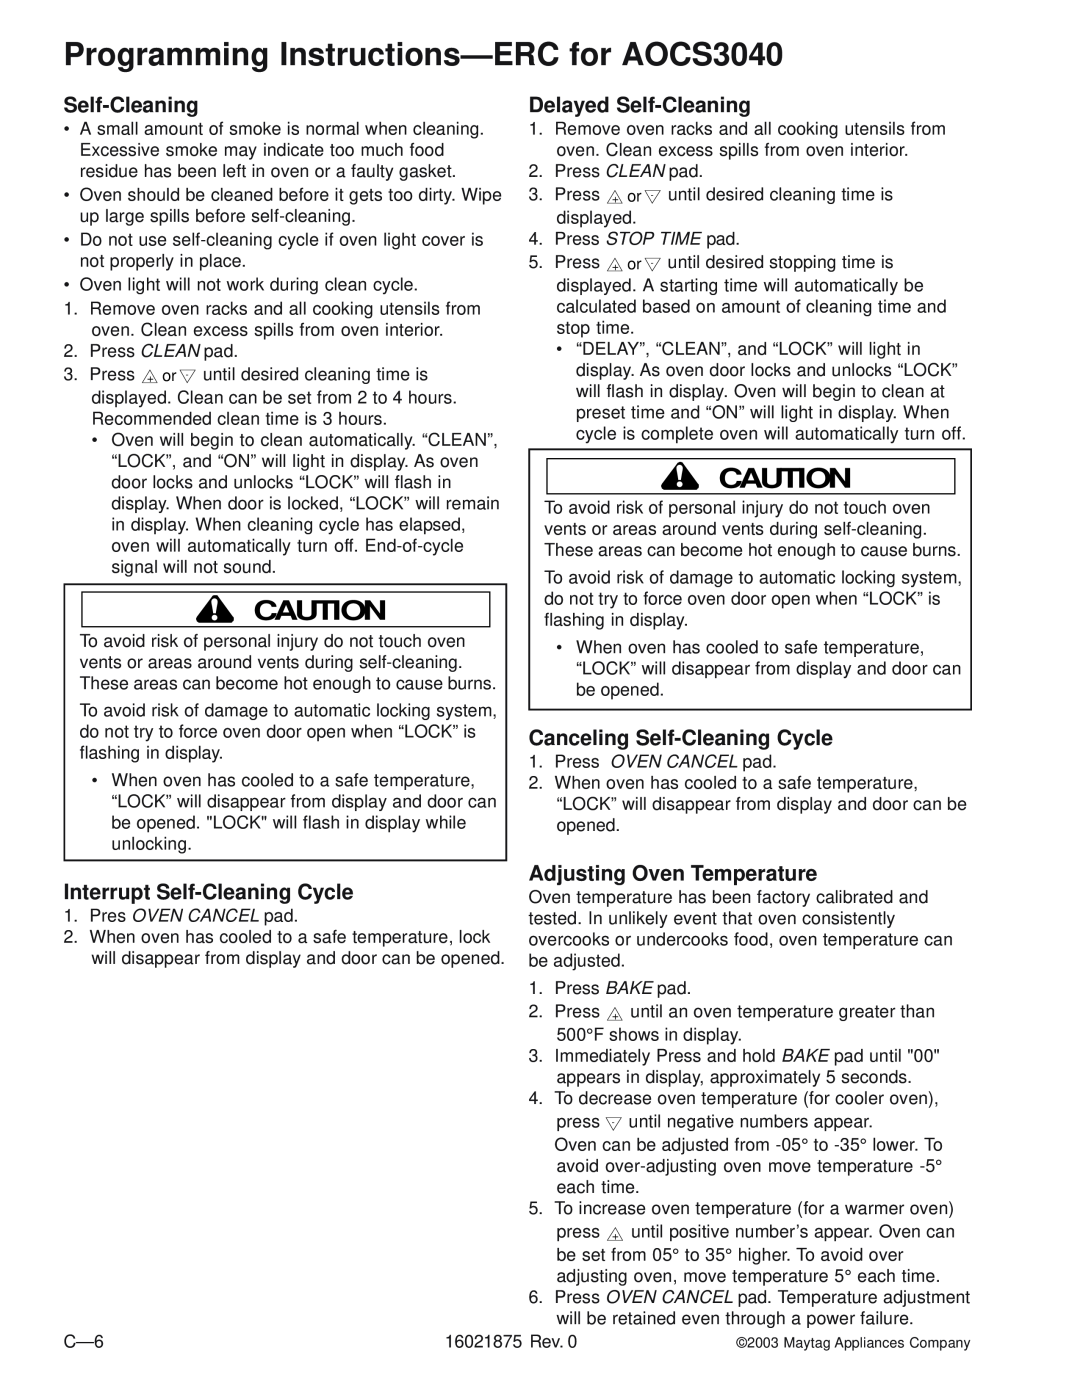 Maytag AOES3030 manual Canceling Self-CleaningCycle, Programming Instructions-ERCfor AOCS3040, Delayed Self-Cleaning 